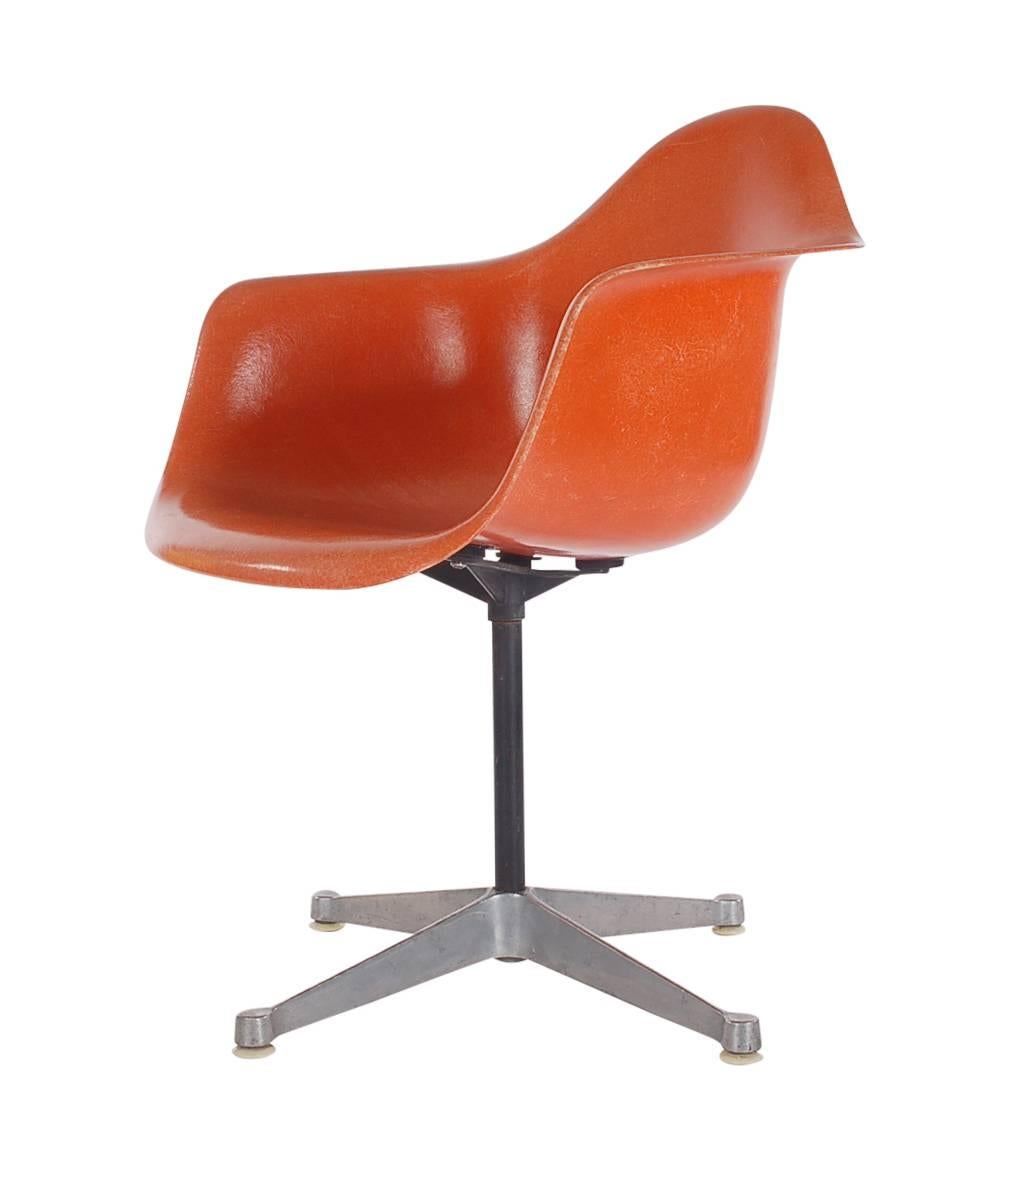 Here we have an iconic design classic from the Mid-Century Modern period. This vintage fiberglass shell chair was designed by Charles Eames and produced by Herman Miller, circa 1972. I have a great iconic retro orange. These chairs are sold with